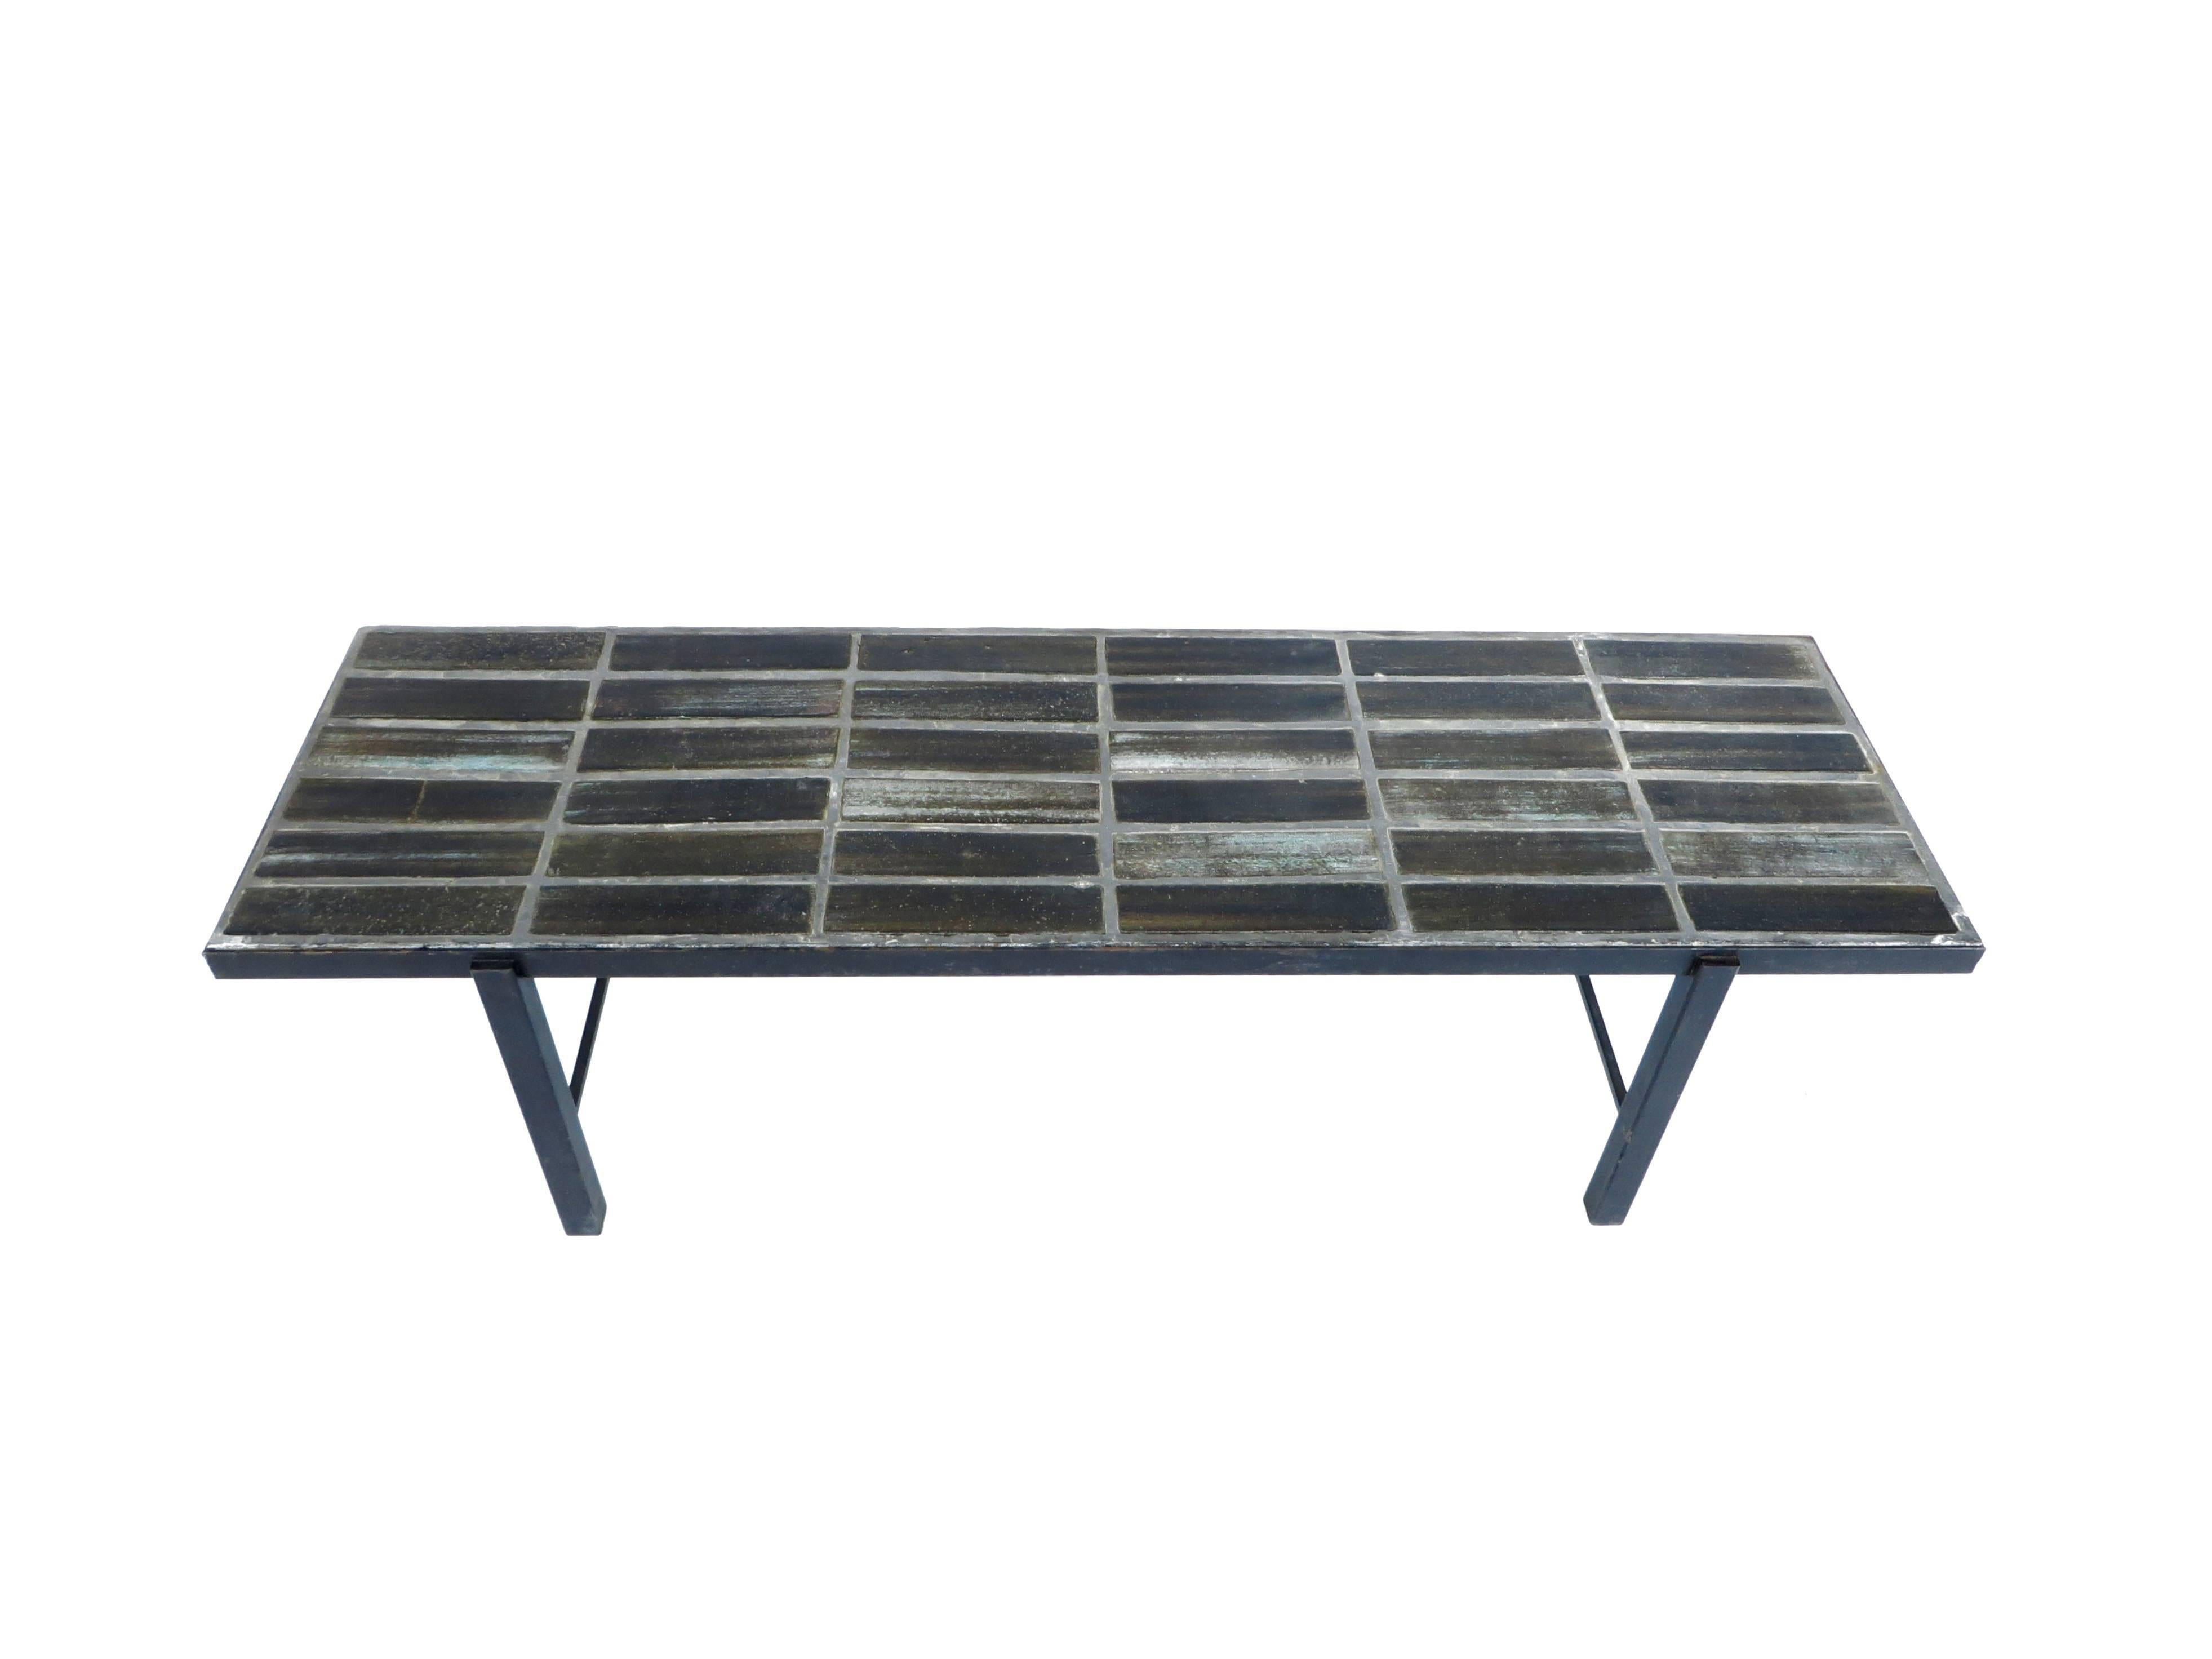 An impressive French, circa 1960s ceramic tile top coffee table on black lacquered iron base. 
The plateau is made of varying shades of blue, varying grays and black and touches of brown artistically glazed elongated tiles set in a dark cement.